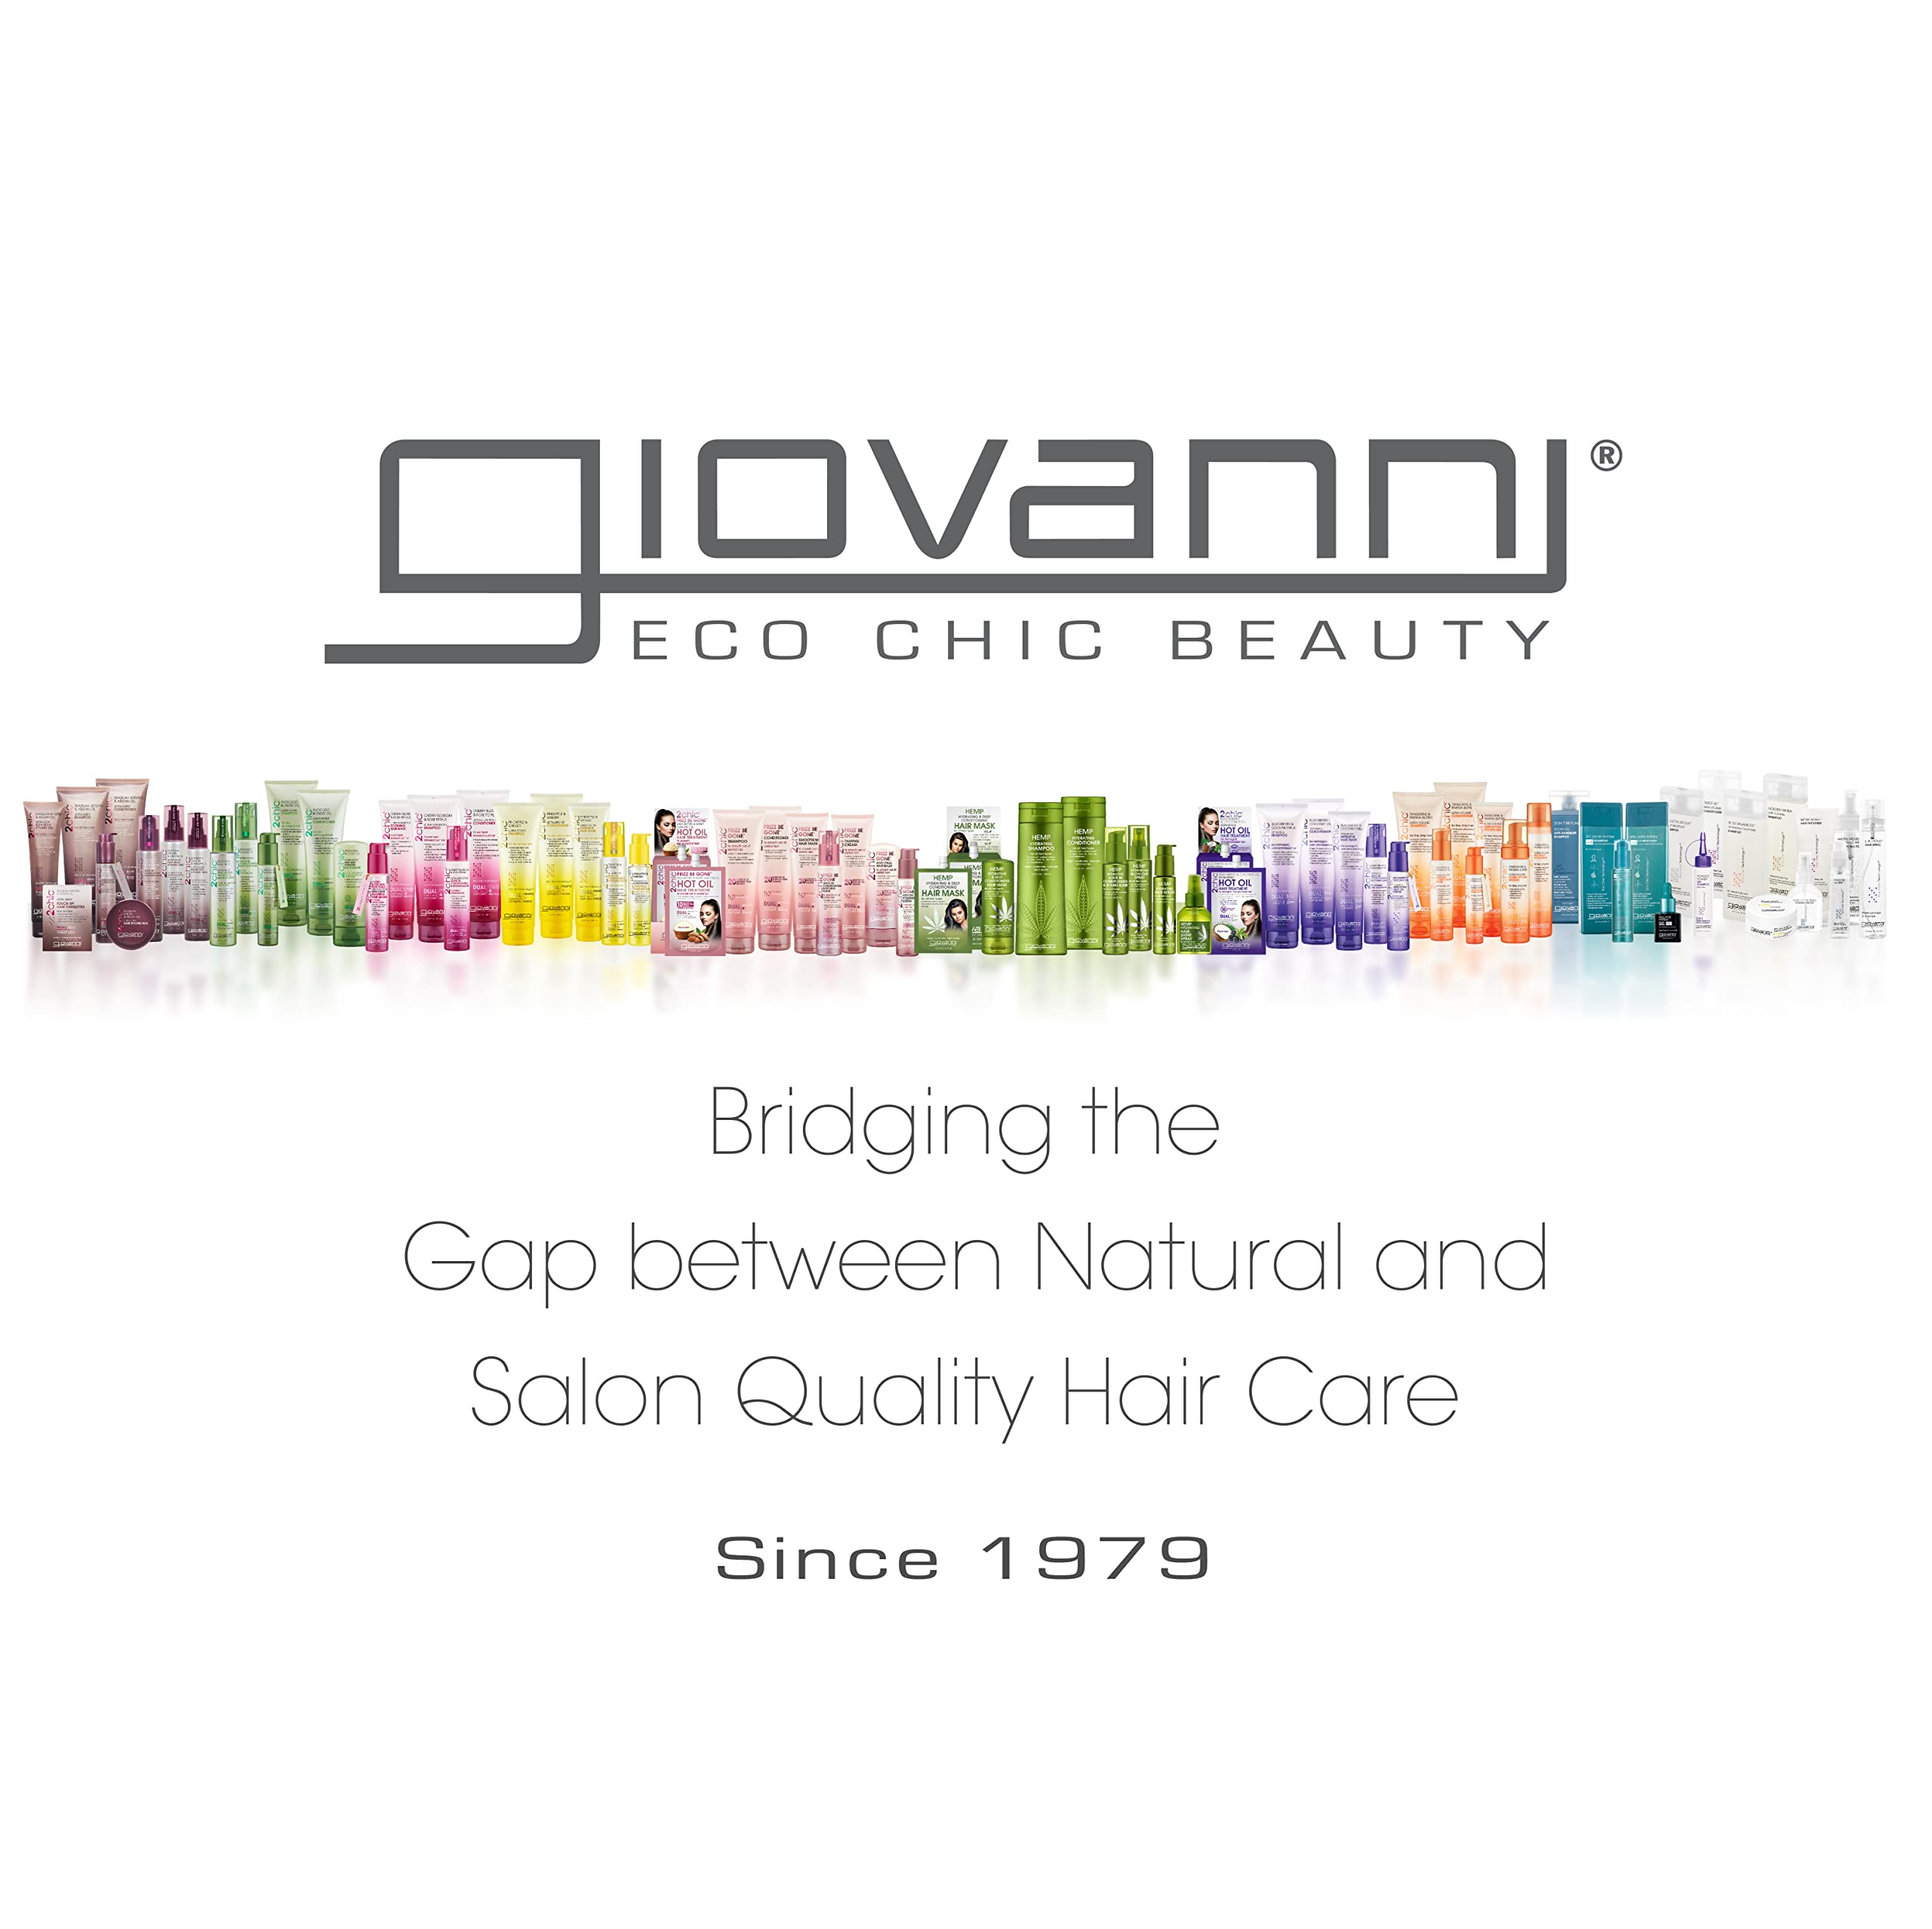 GIOVANNI 50:50 Balanced Hydrating Calming Conditioner, 24 oz. Leaves Hair pH Balanced, Ideal for Over-Processed, Environmentally Stressed Hair, No Parabens, Color Safe, Sulfate Free (Pack of 1)